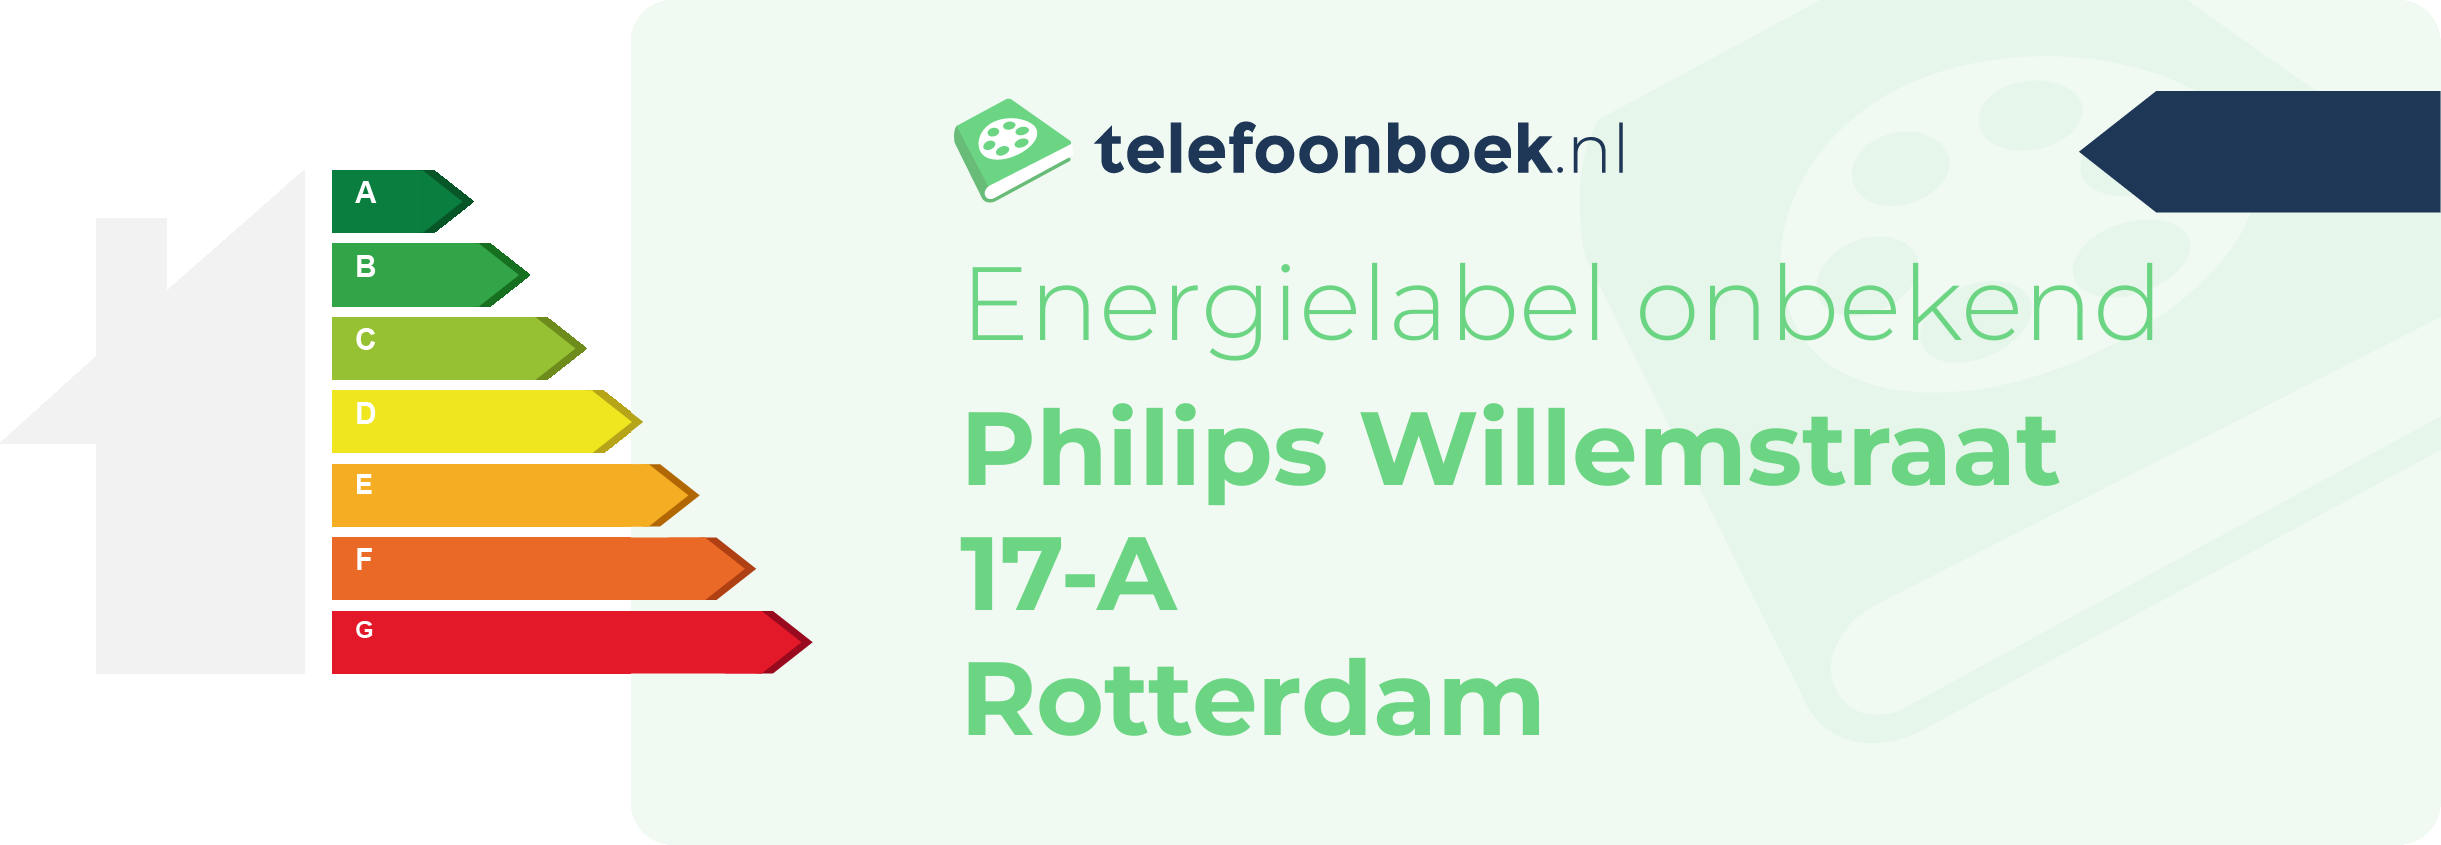 Energielabel Philips Willemstraat 17-A Rotterdam